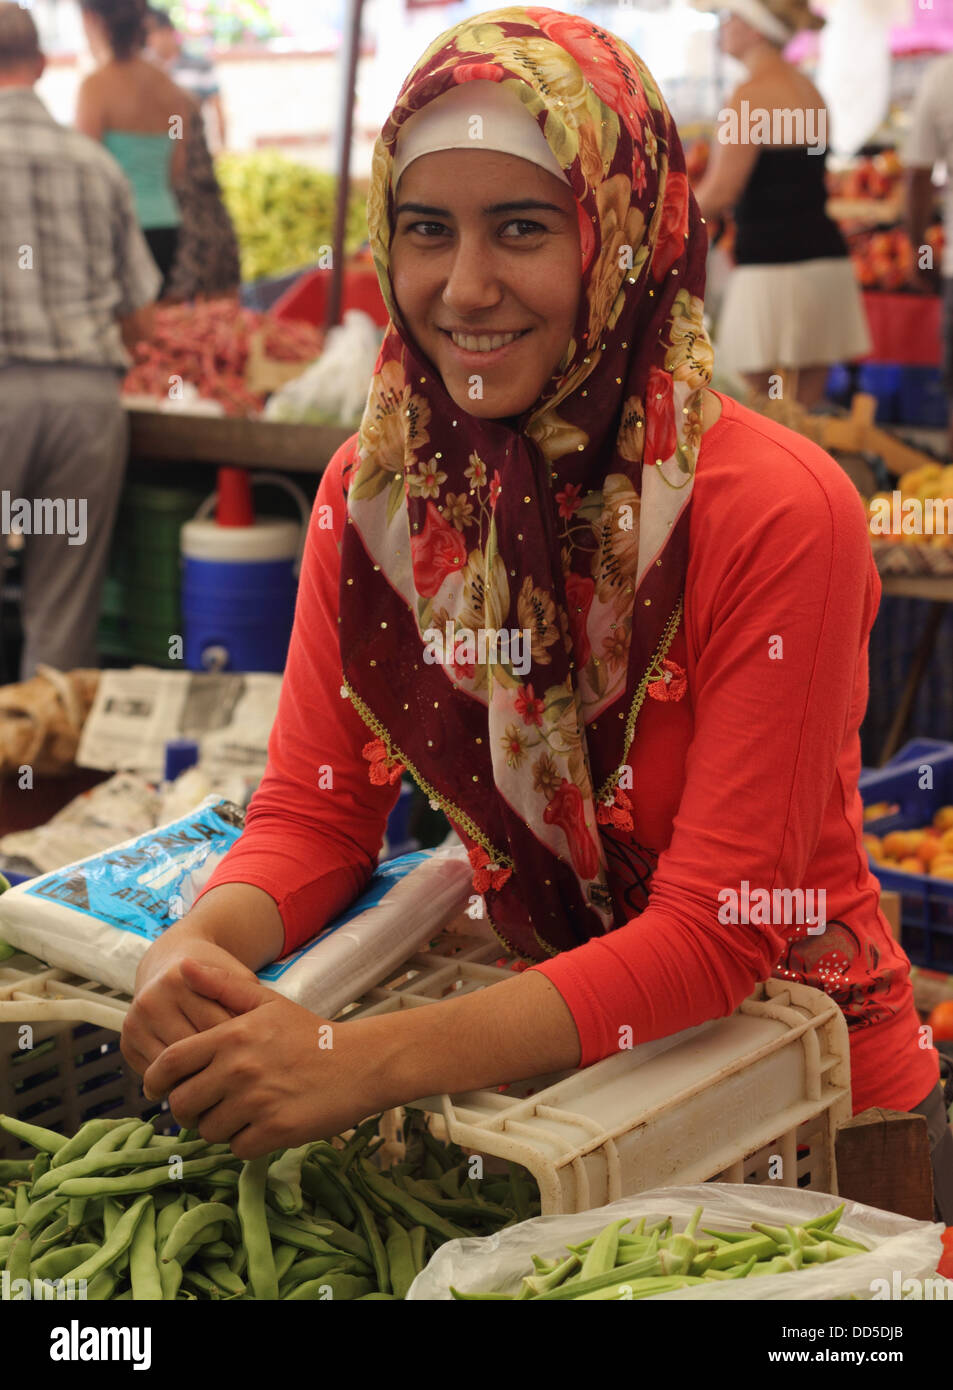 A pretty woman selling her fruit and vegetables Stock Photo